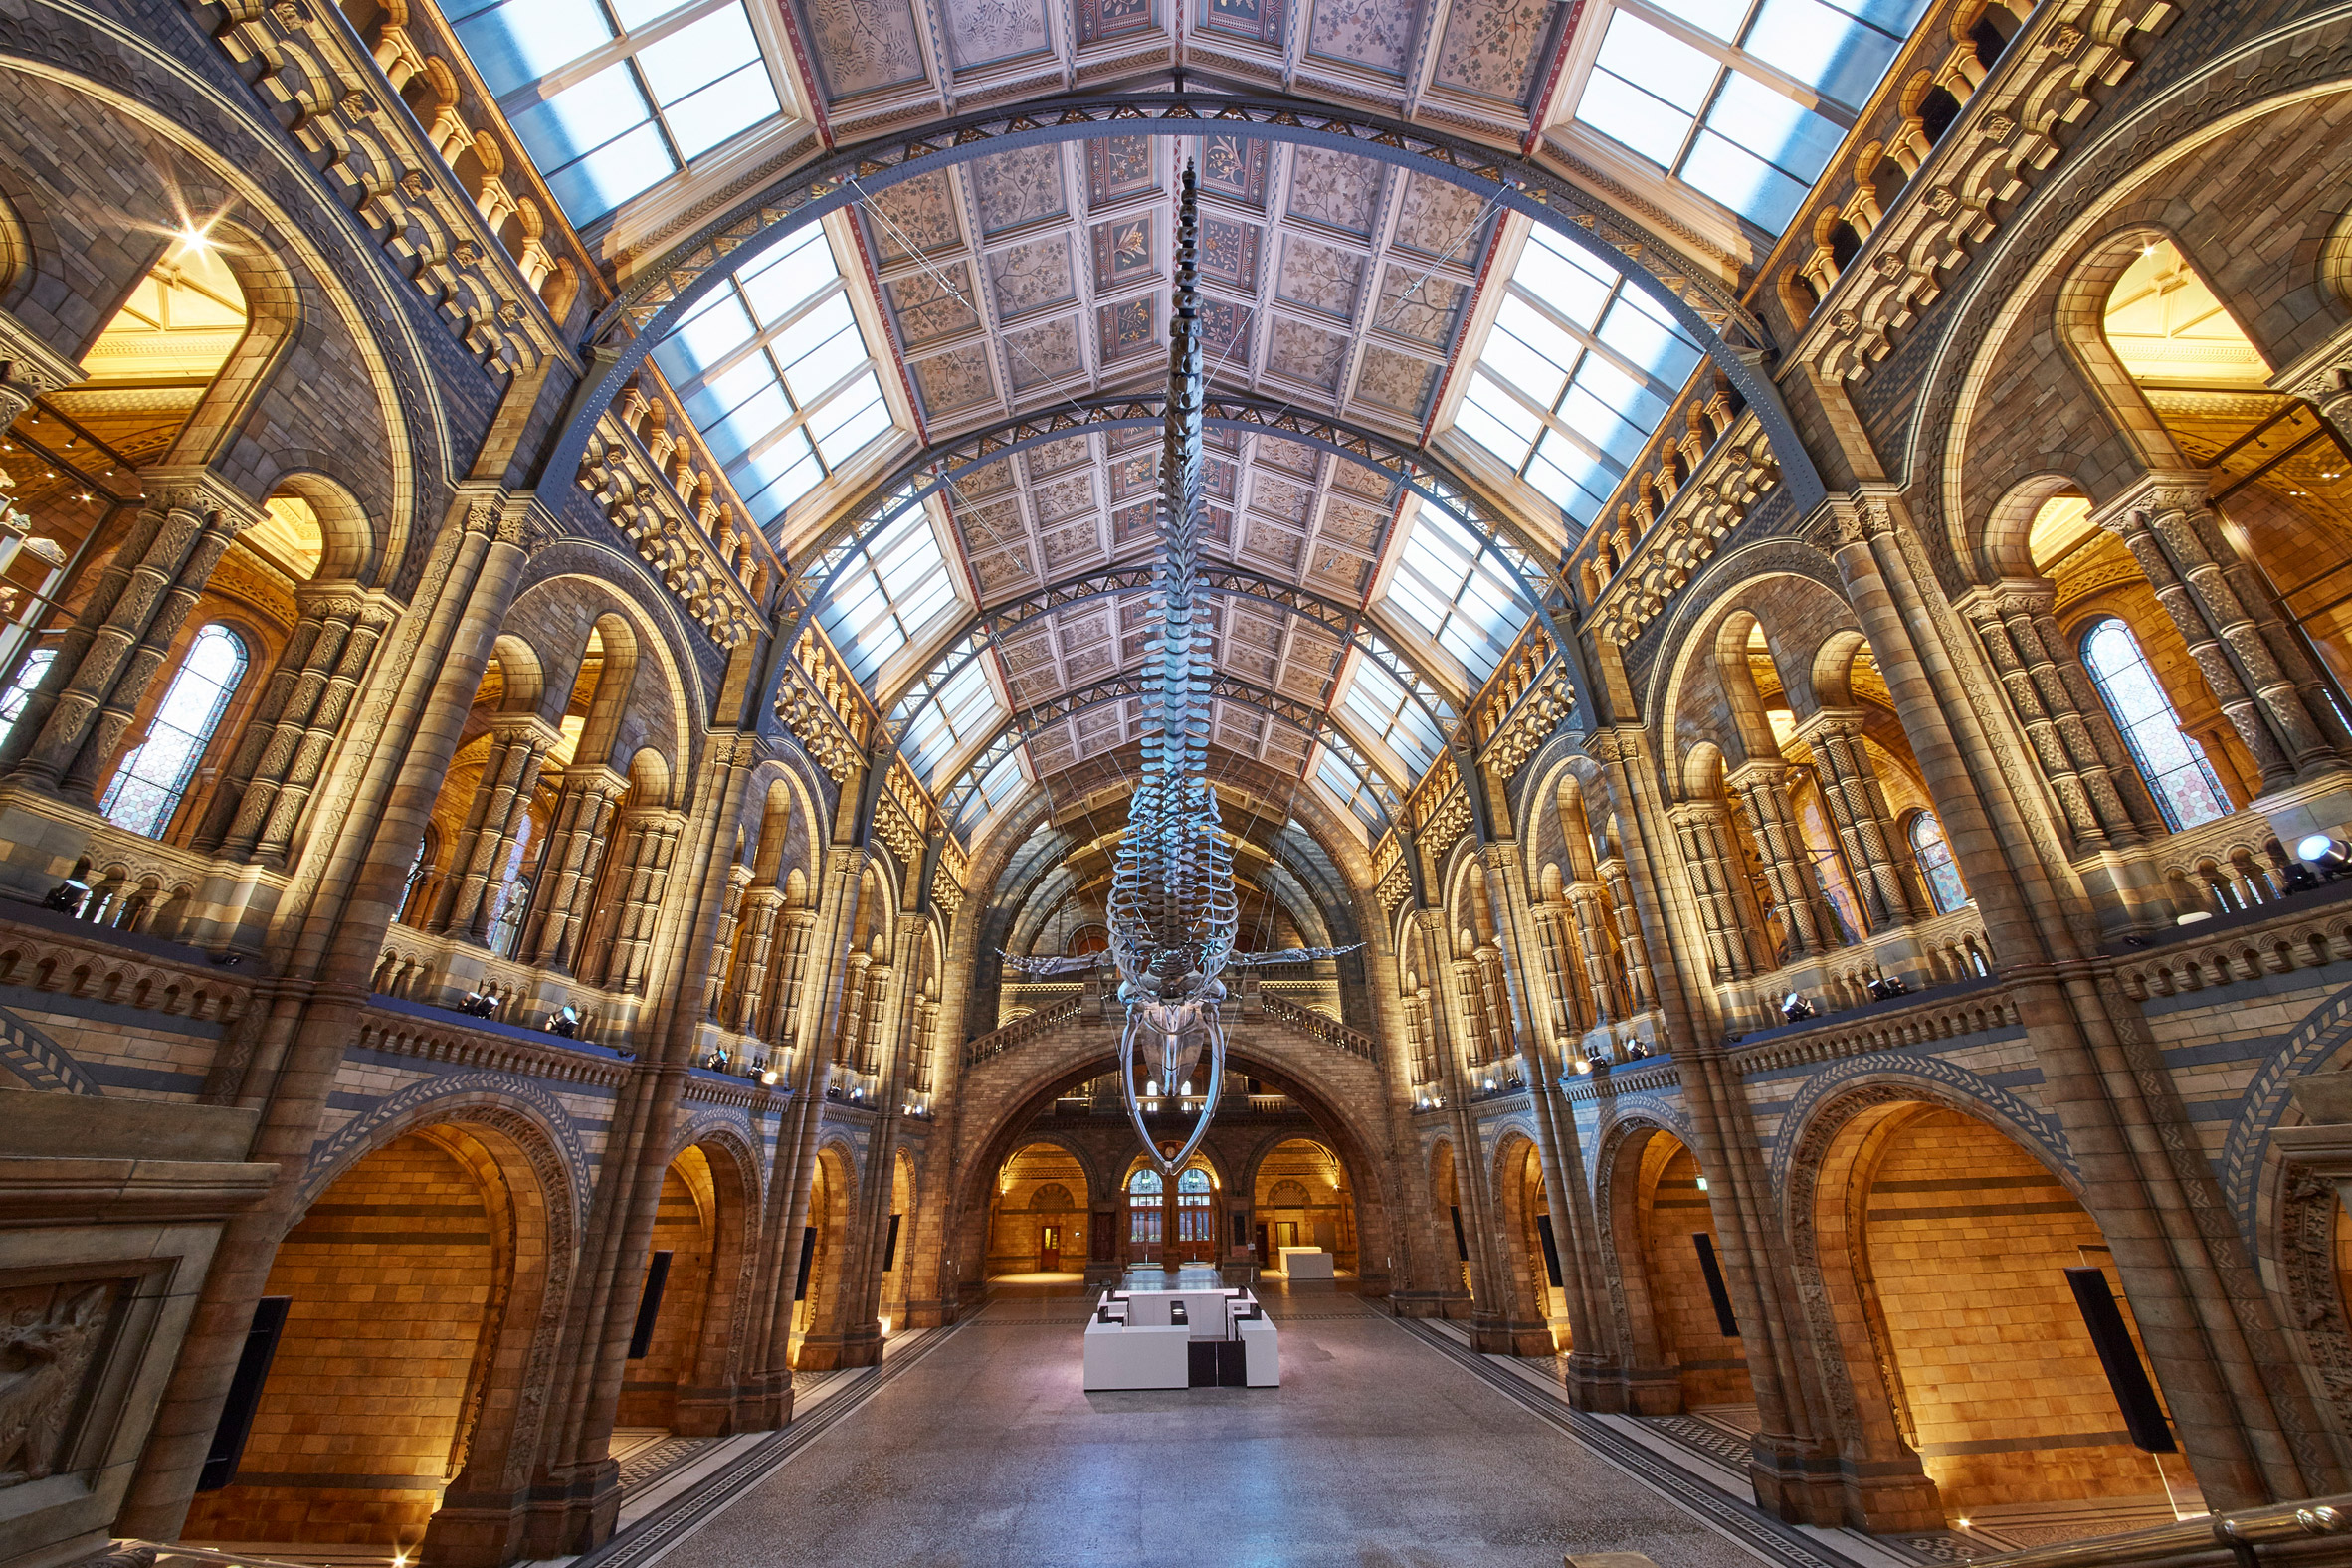 Blue whale in Hintze Hall at the Natural History Museum